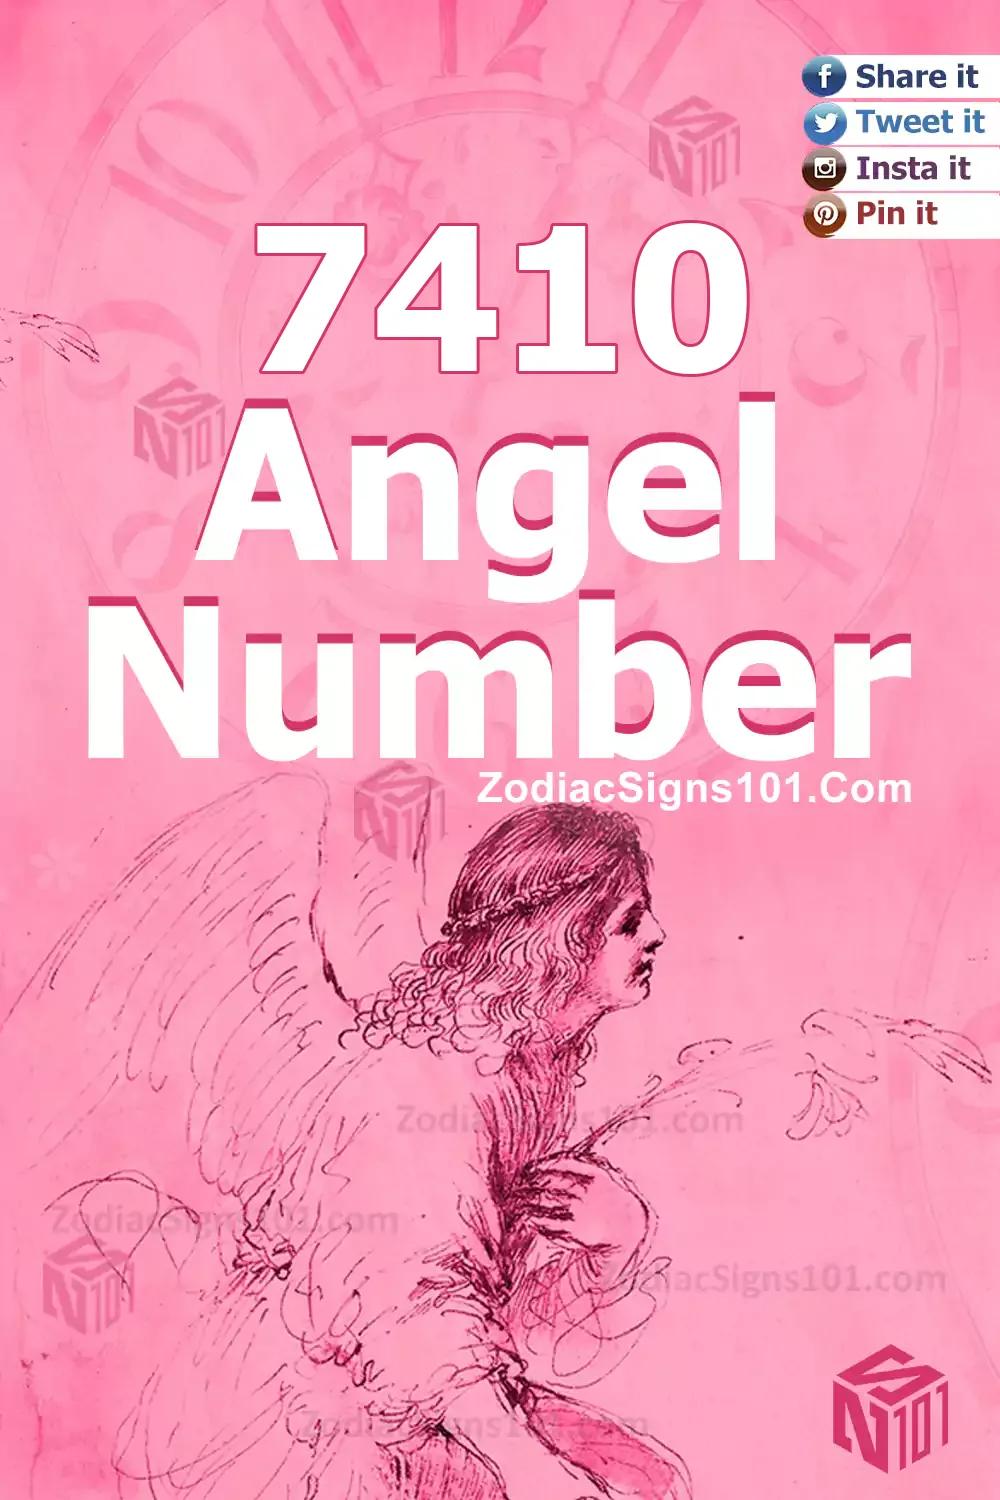 7410 Angel Number Meaning